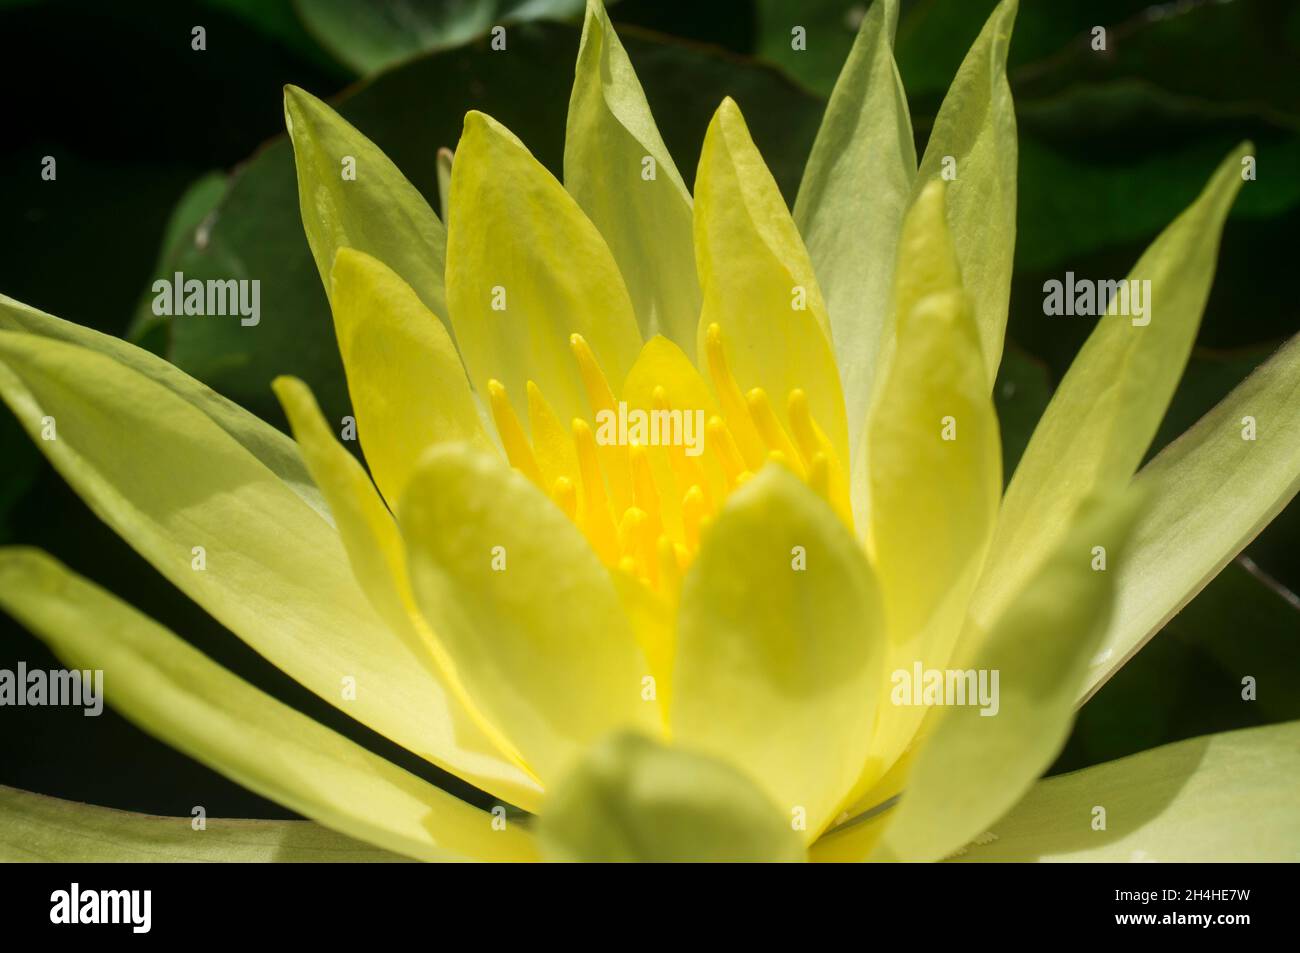 Mexican waterlily or Nymphaea mexicana. Problematic invasive specie. Closeup Stock Photo